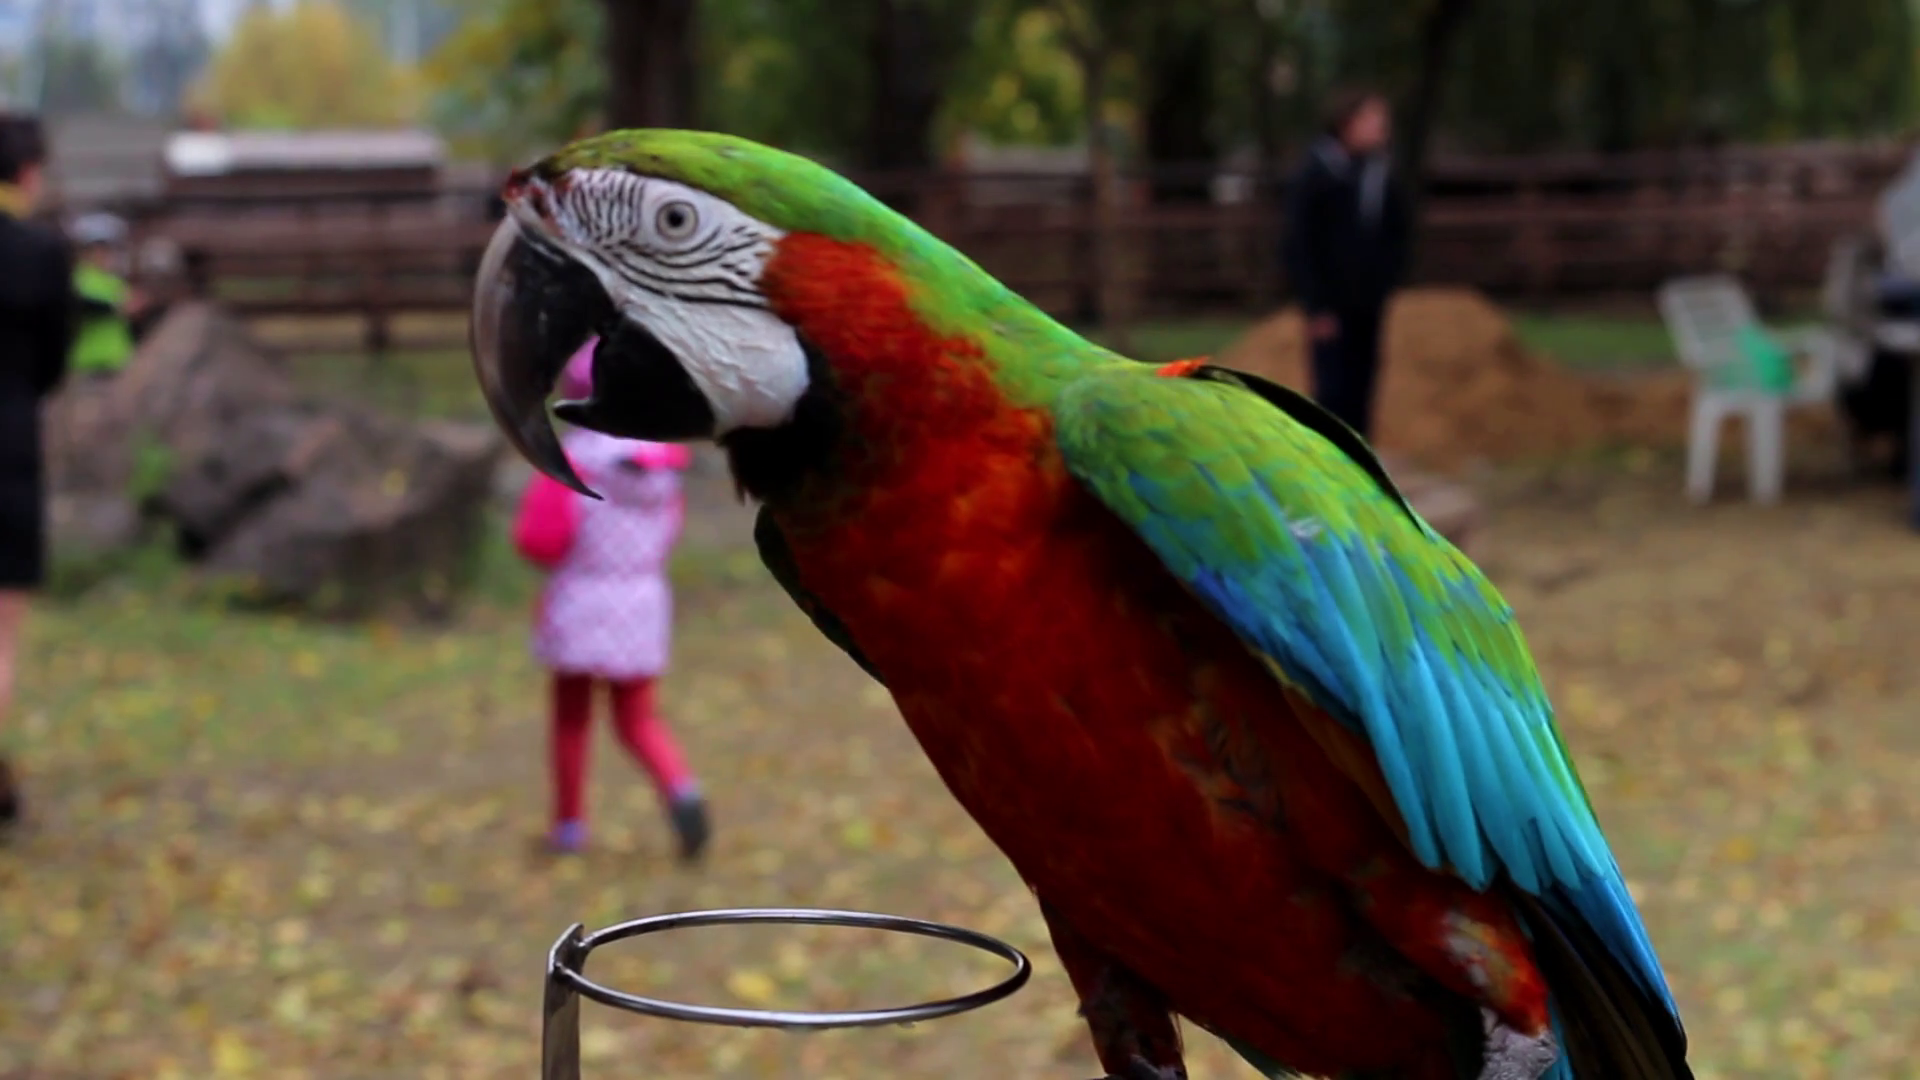 Painted Parrot on the Background of People in the Zoo Runs on a ...